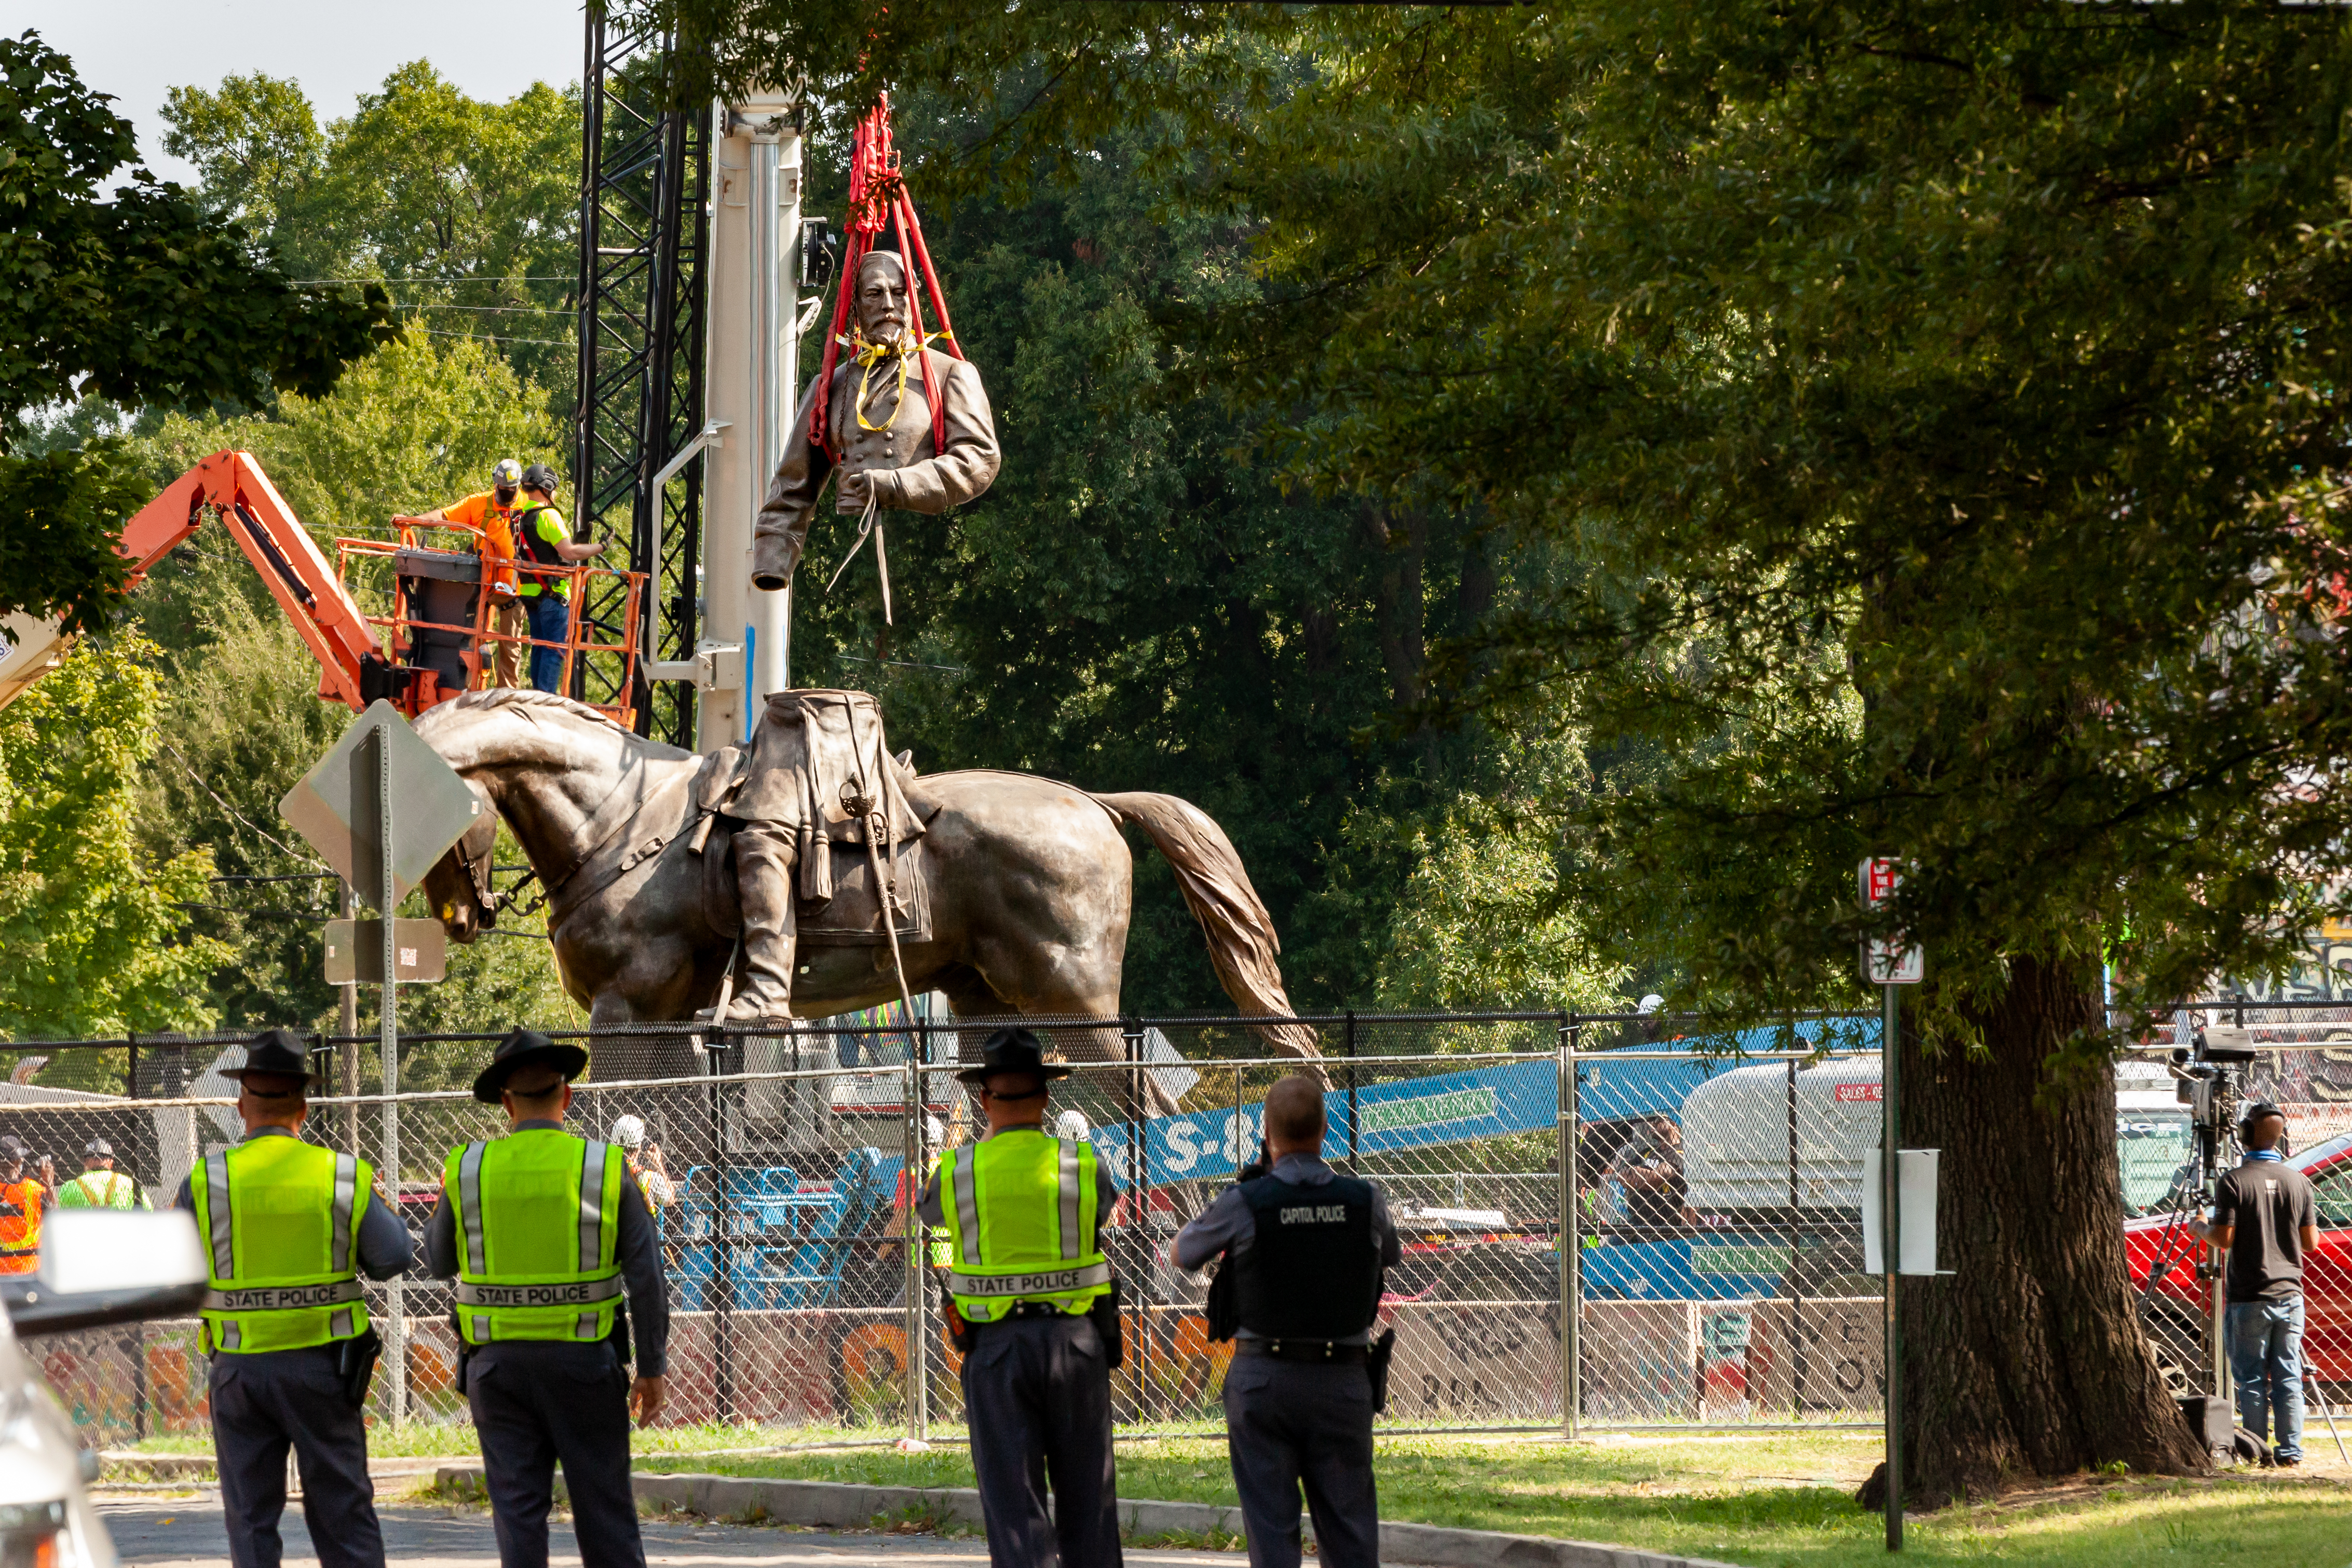 The head and torso of the statue of Confederate general Robert E. Lee are separated for transport following the statue's removal.  The Virginia supreme court ruled last week that the six-story monument could be removed.  It has yet to be determined whether the pedestal covered in anti-racism graffiti will be removed given its prominent role in the 2020 anti-racism uprising in Richmond. (Photo by Allison Bailey/NurPhoto)NO USE FRANCE